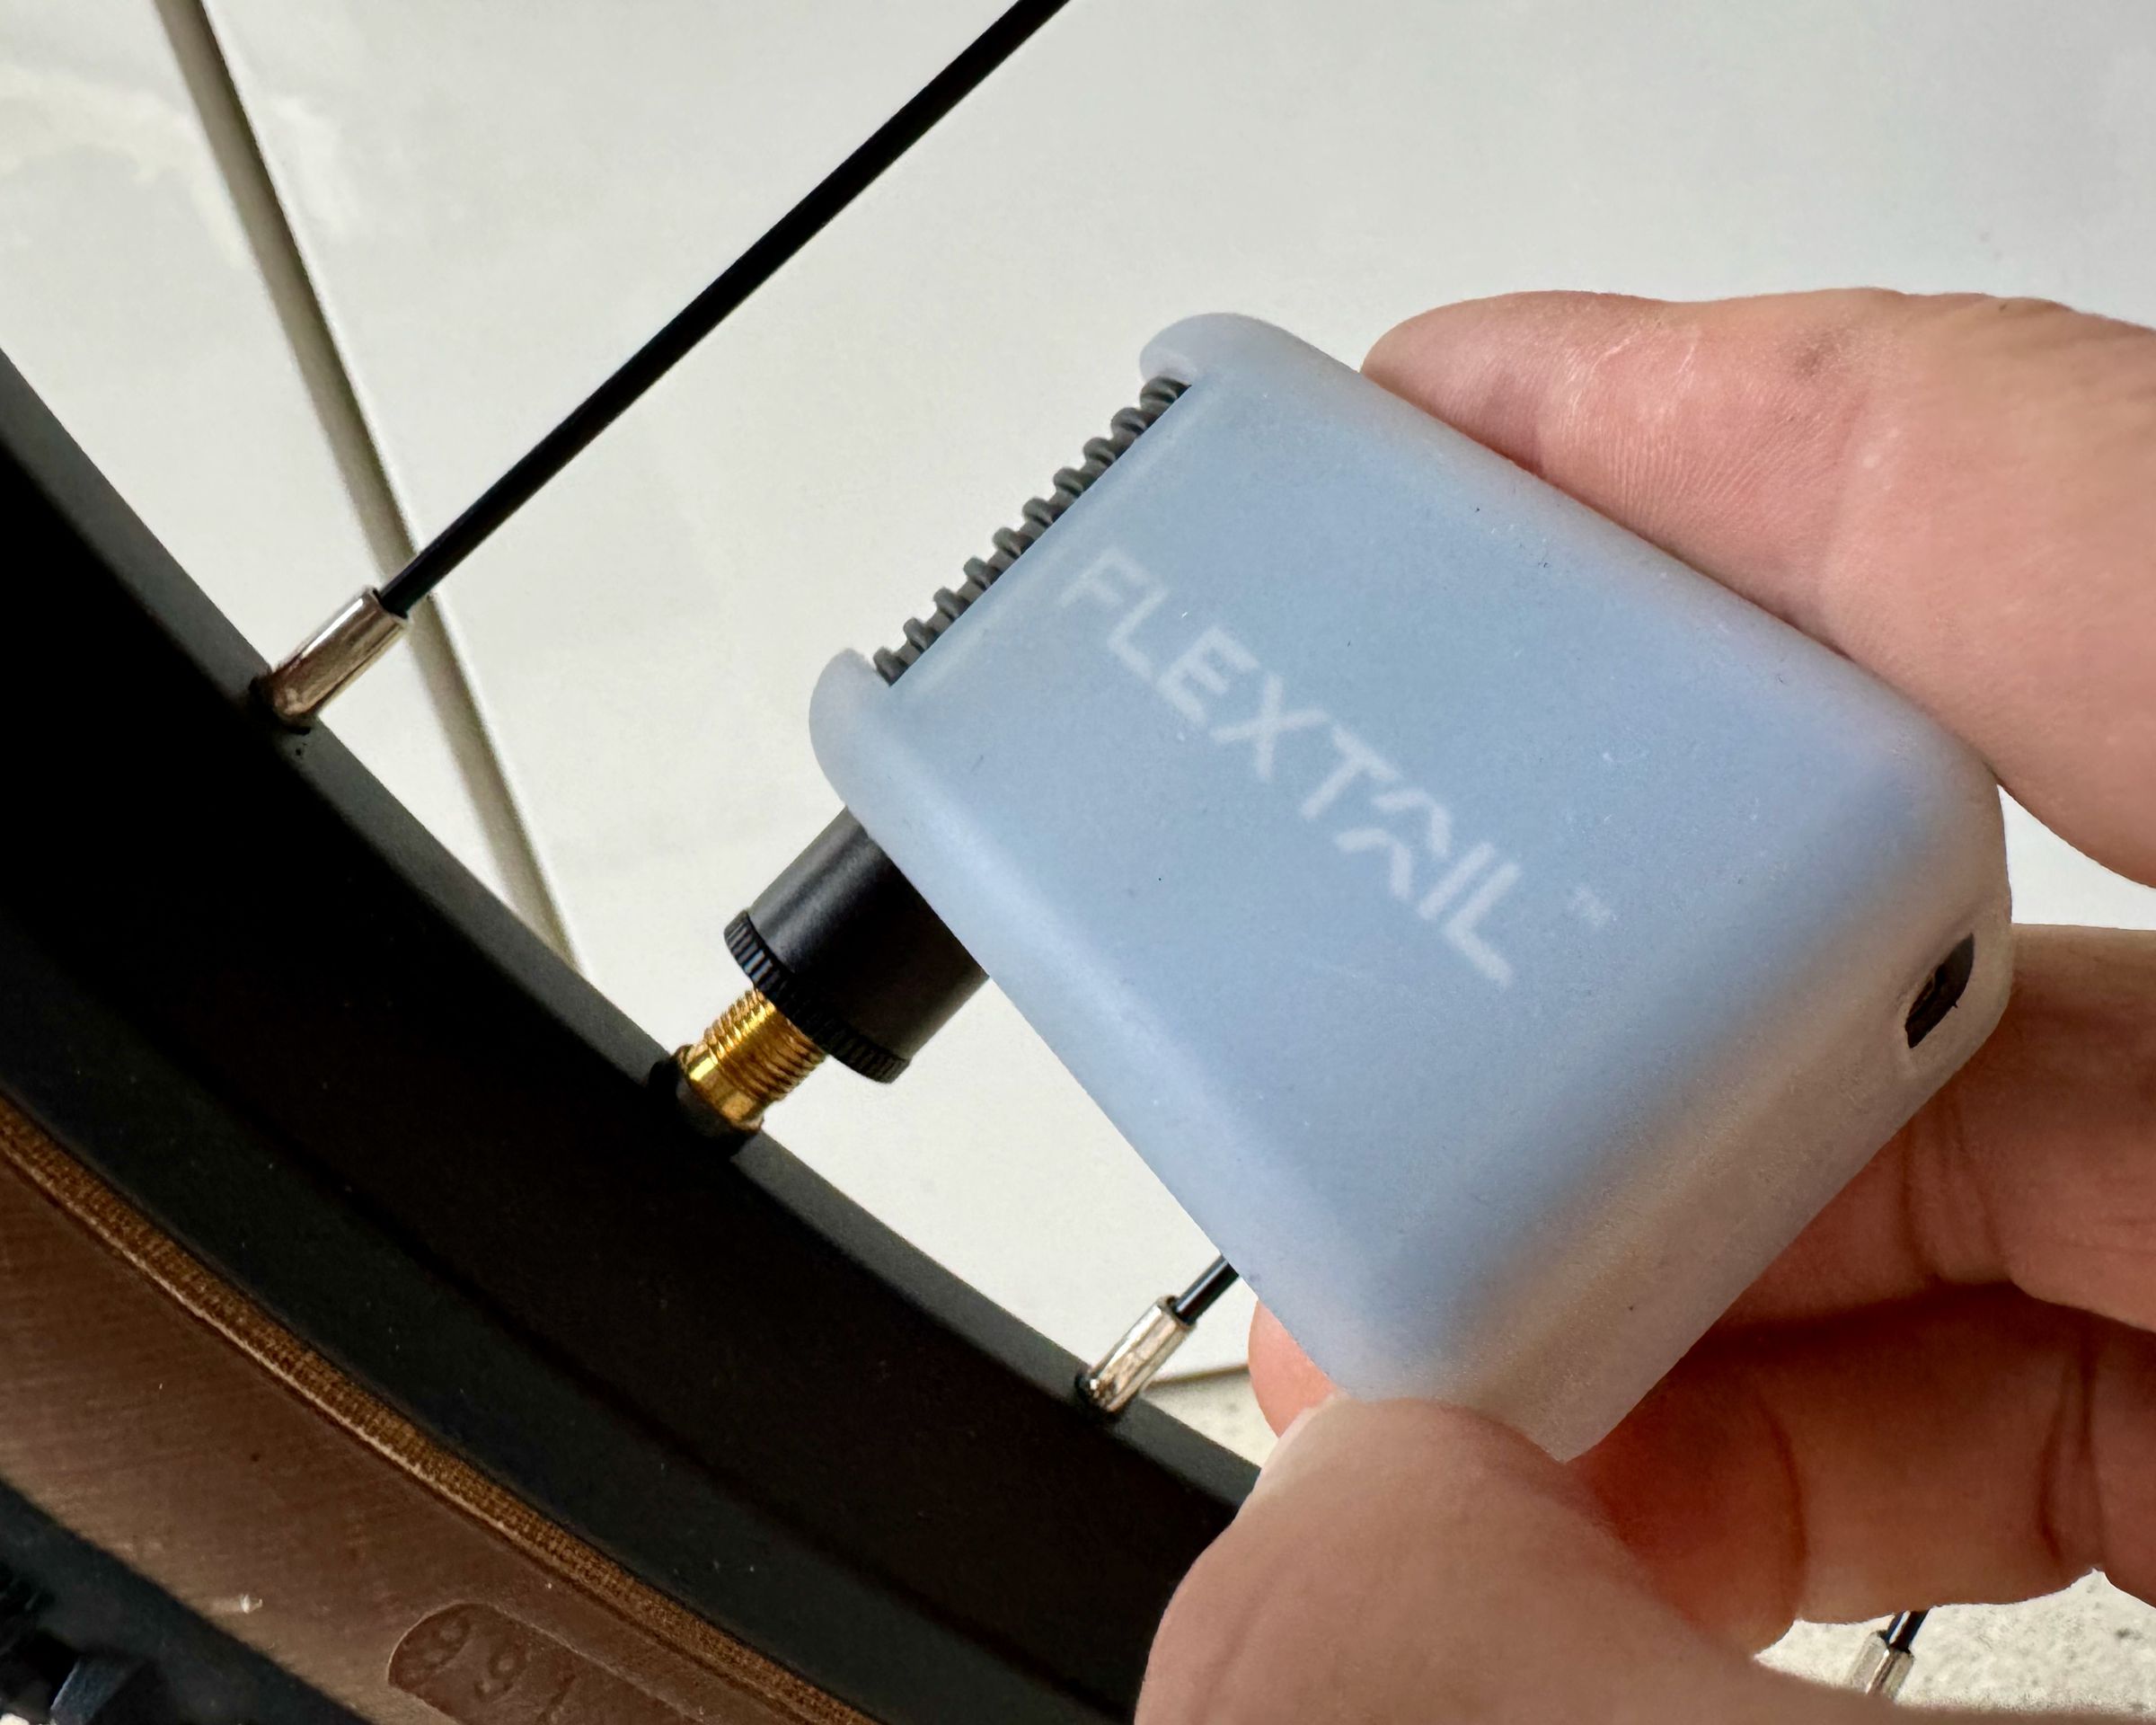 The tiny Flextail pump inflated this city bike tire in 45 seconds.